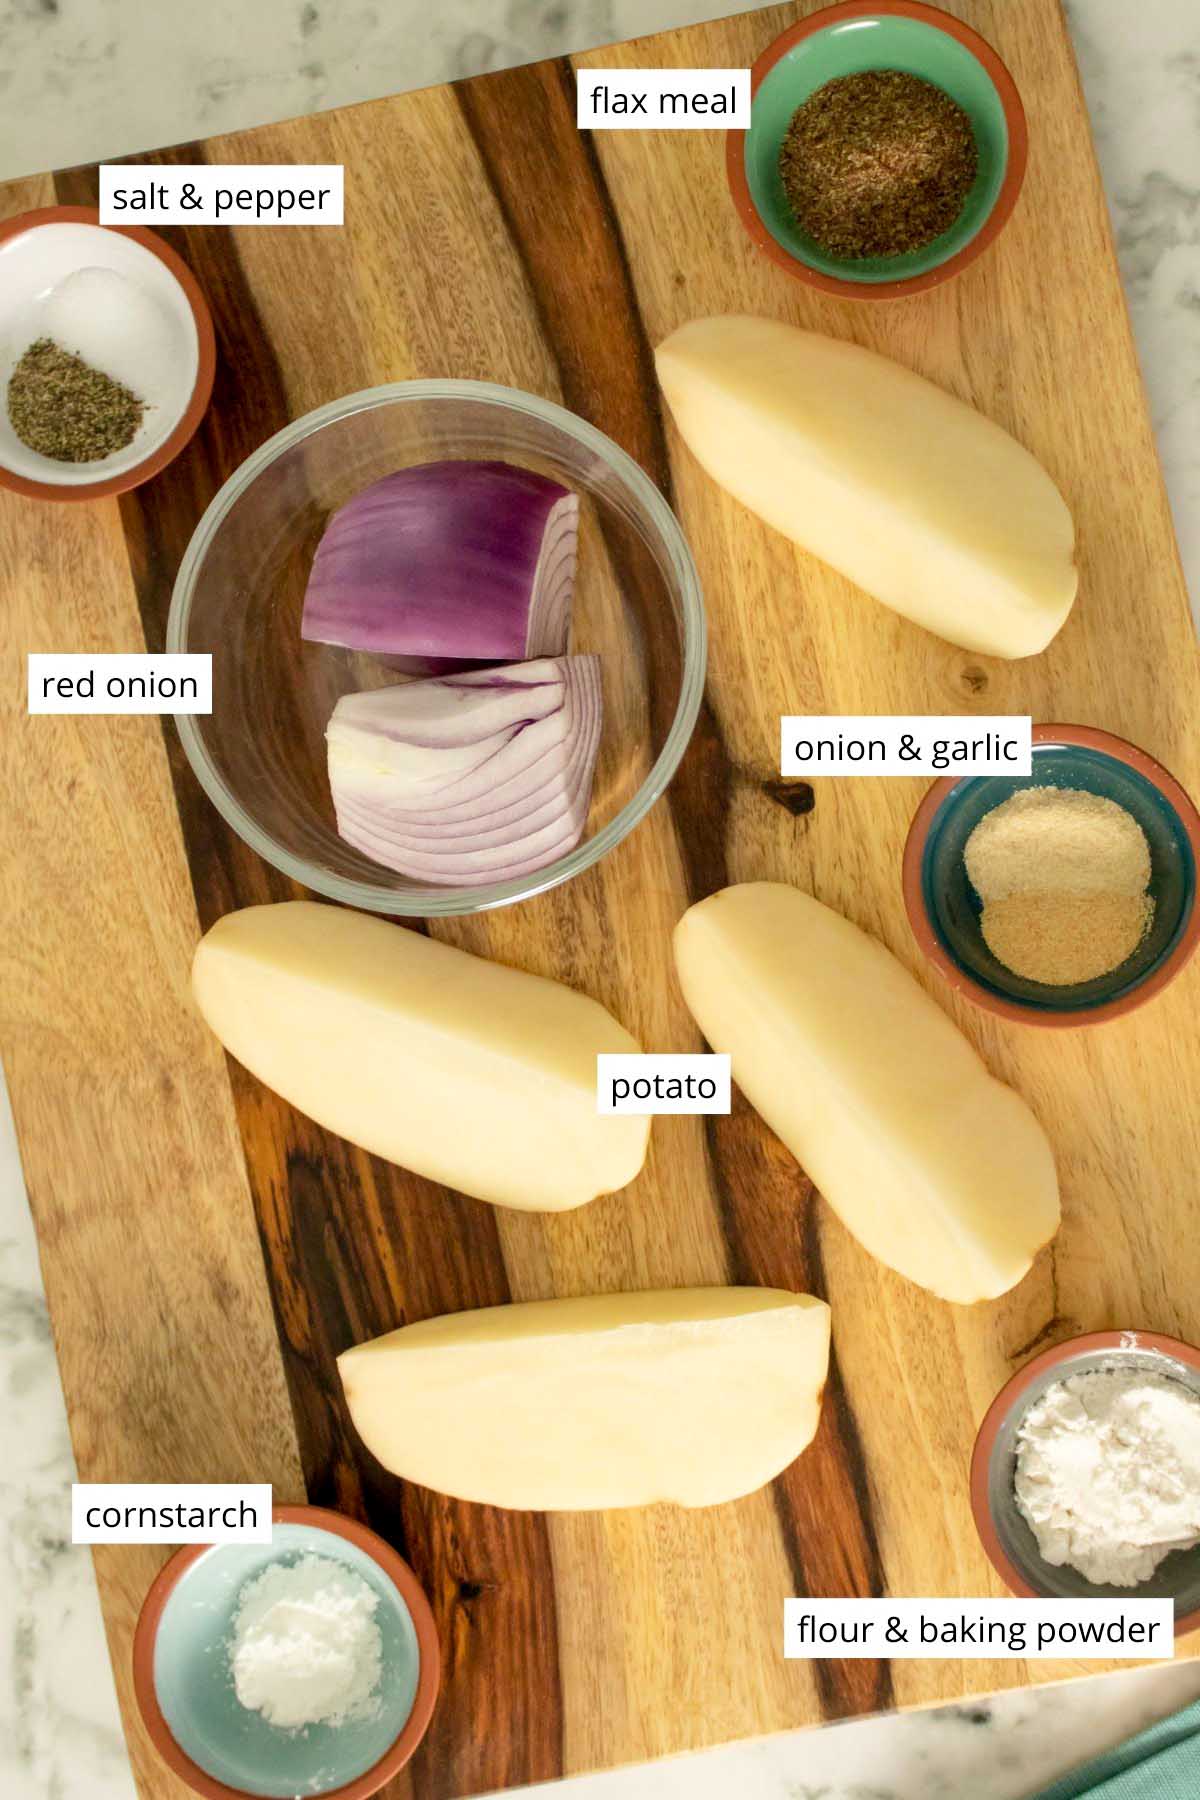 peeled, quartered potato and pieces of onion with seasonings and other dry ingredients on a cutting board with text labels